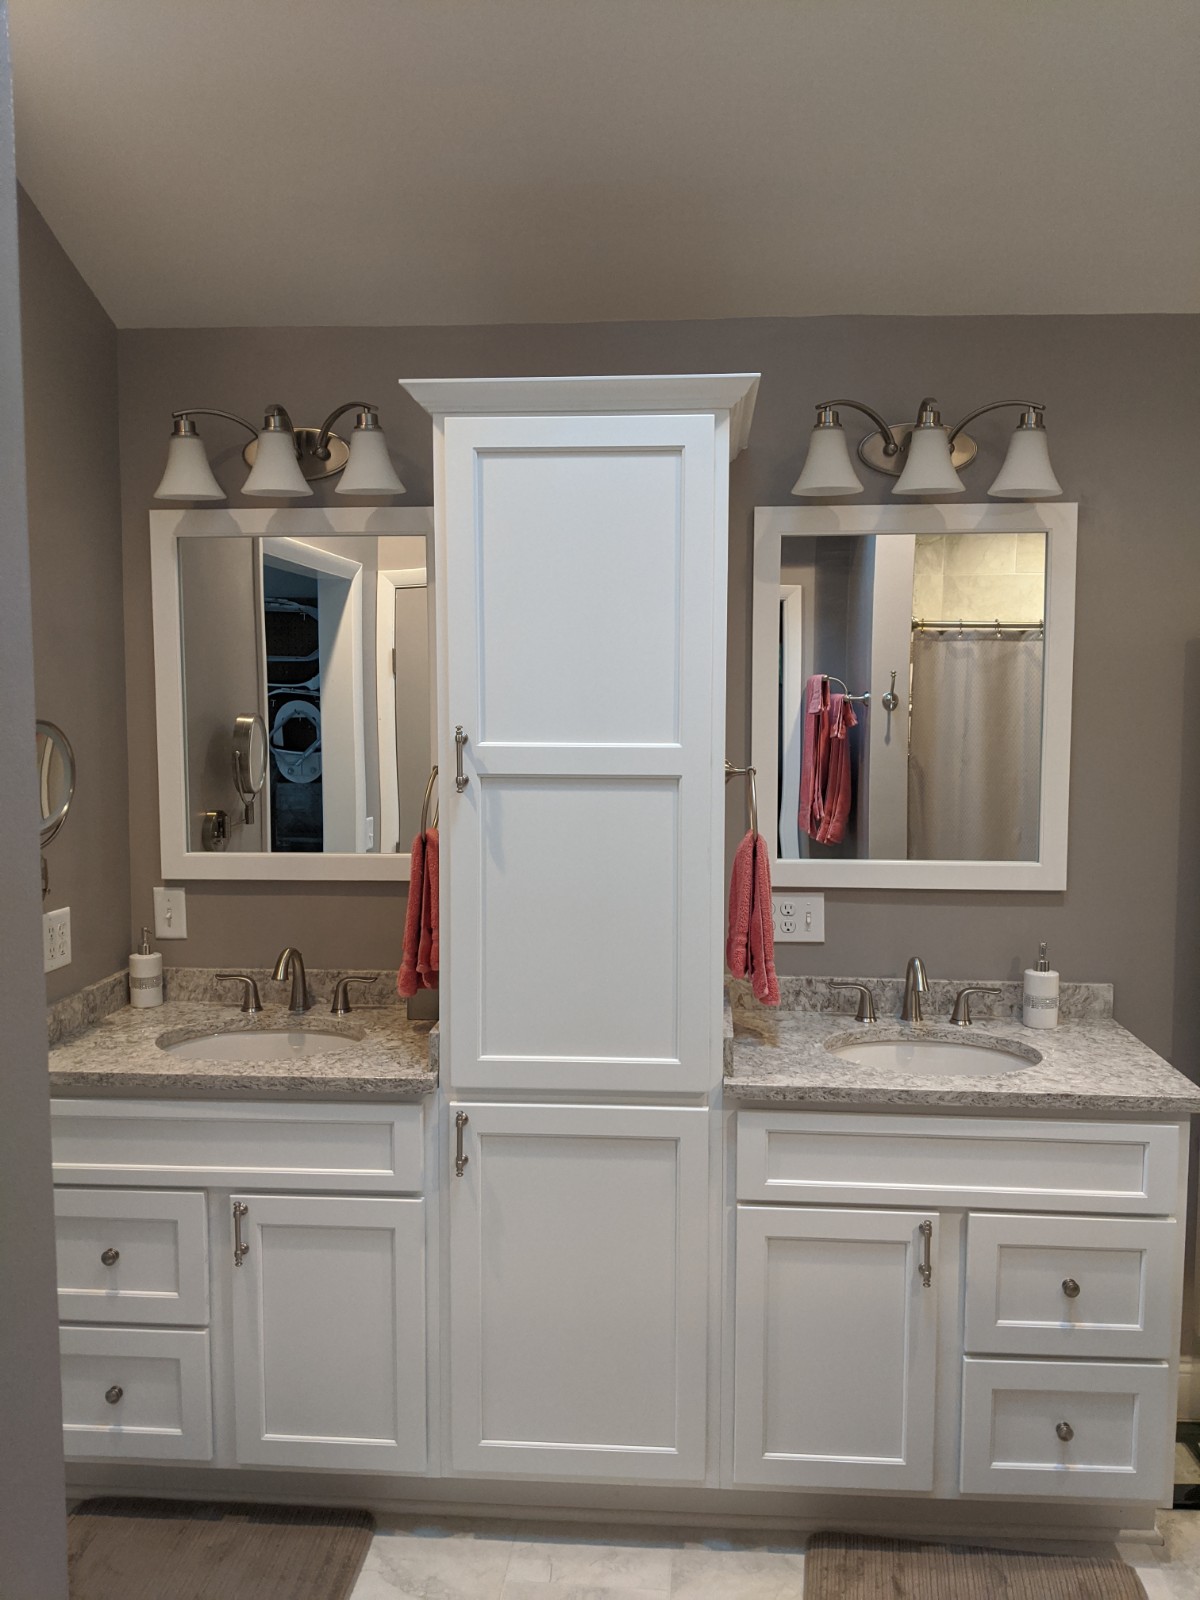 This picture is showing the double vanities now on one wall with the linen cabinet between them.  Prevents the vanities from sticking out into the room and blocking the flow.  White painted vanities with quartz tops are elegant and beautiful as well as functional